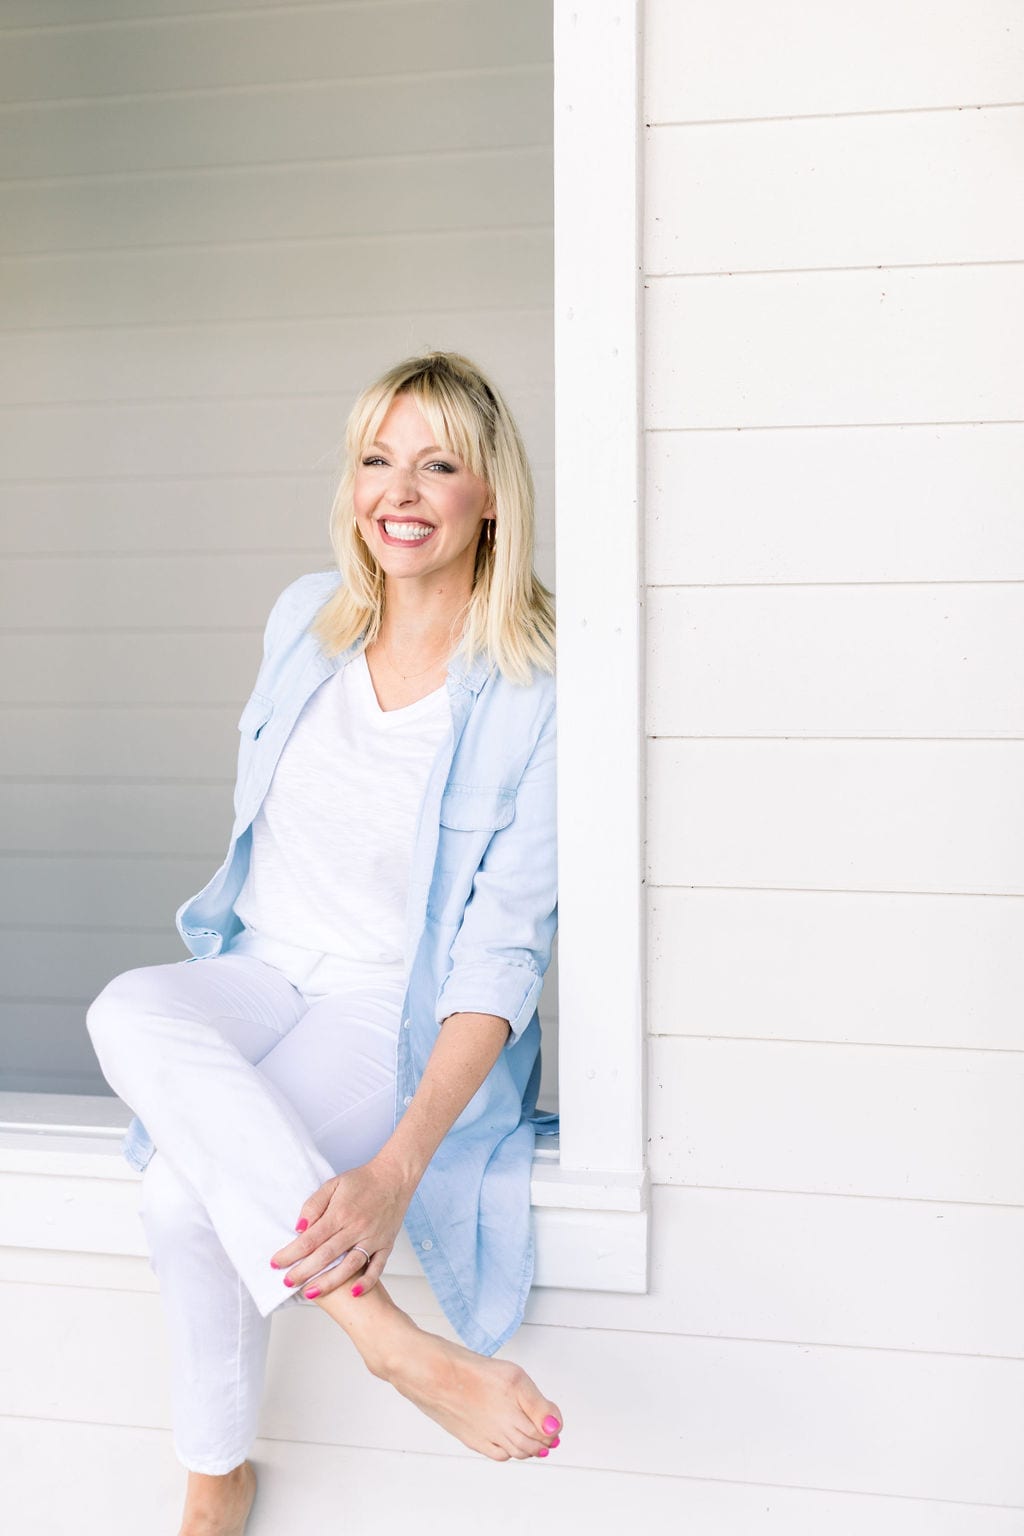 Chambray Tunic with white Chicos Slub Tee and White Jeans.